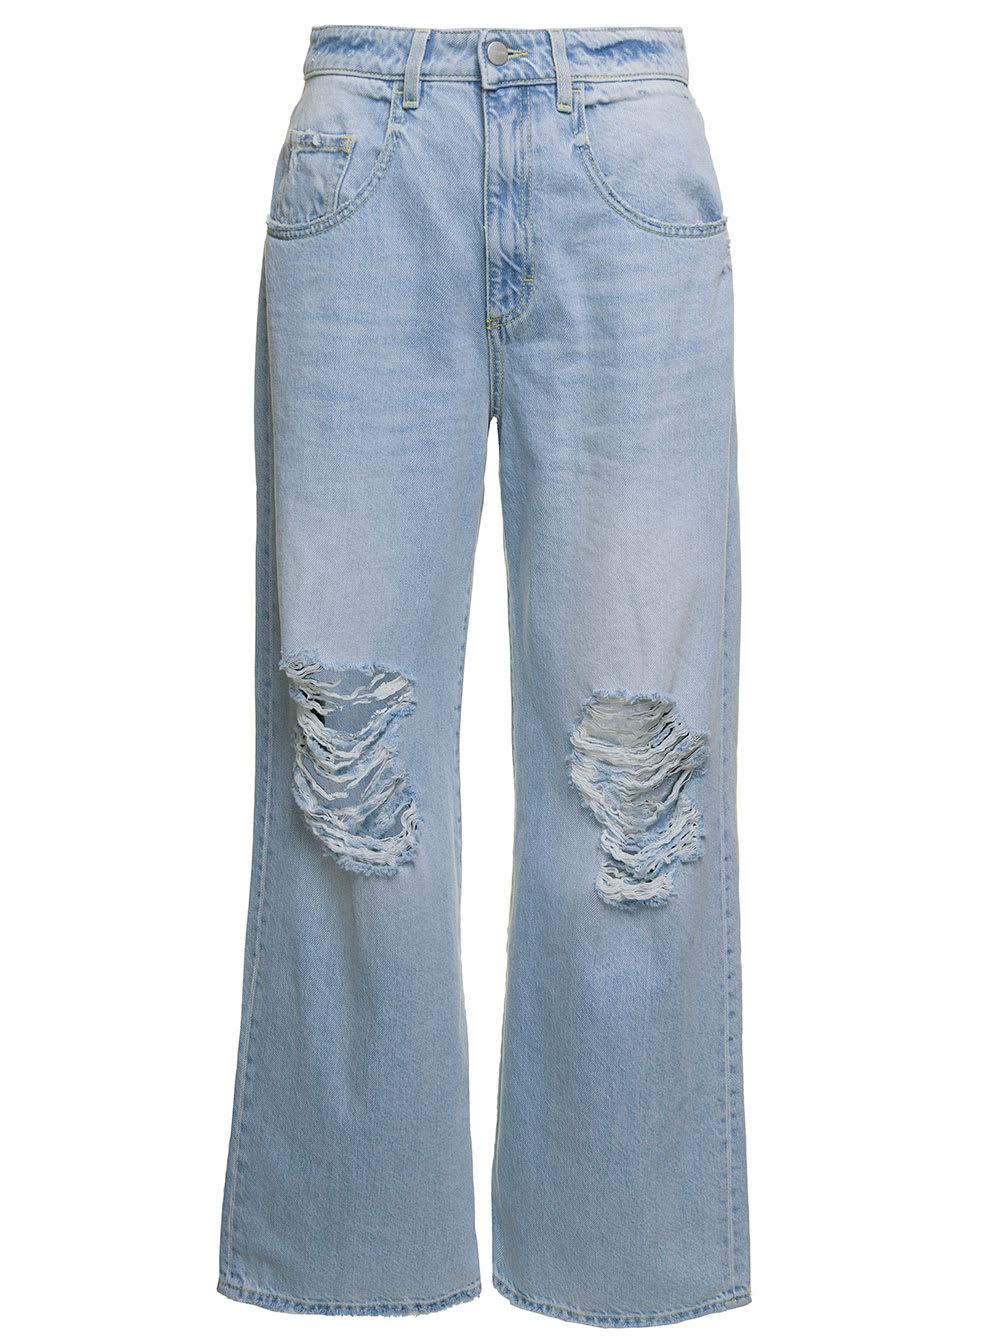 ICON DENIM Poppy Light Blue Five-pocket Jeans With Rips In Cotton Denim ...